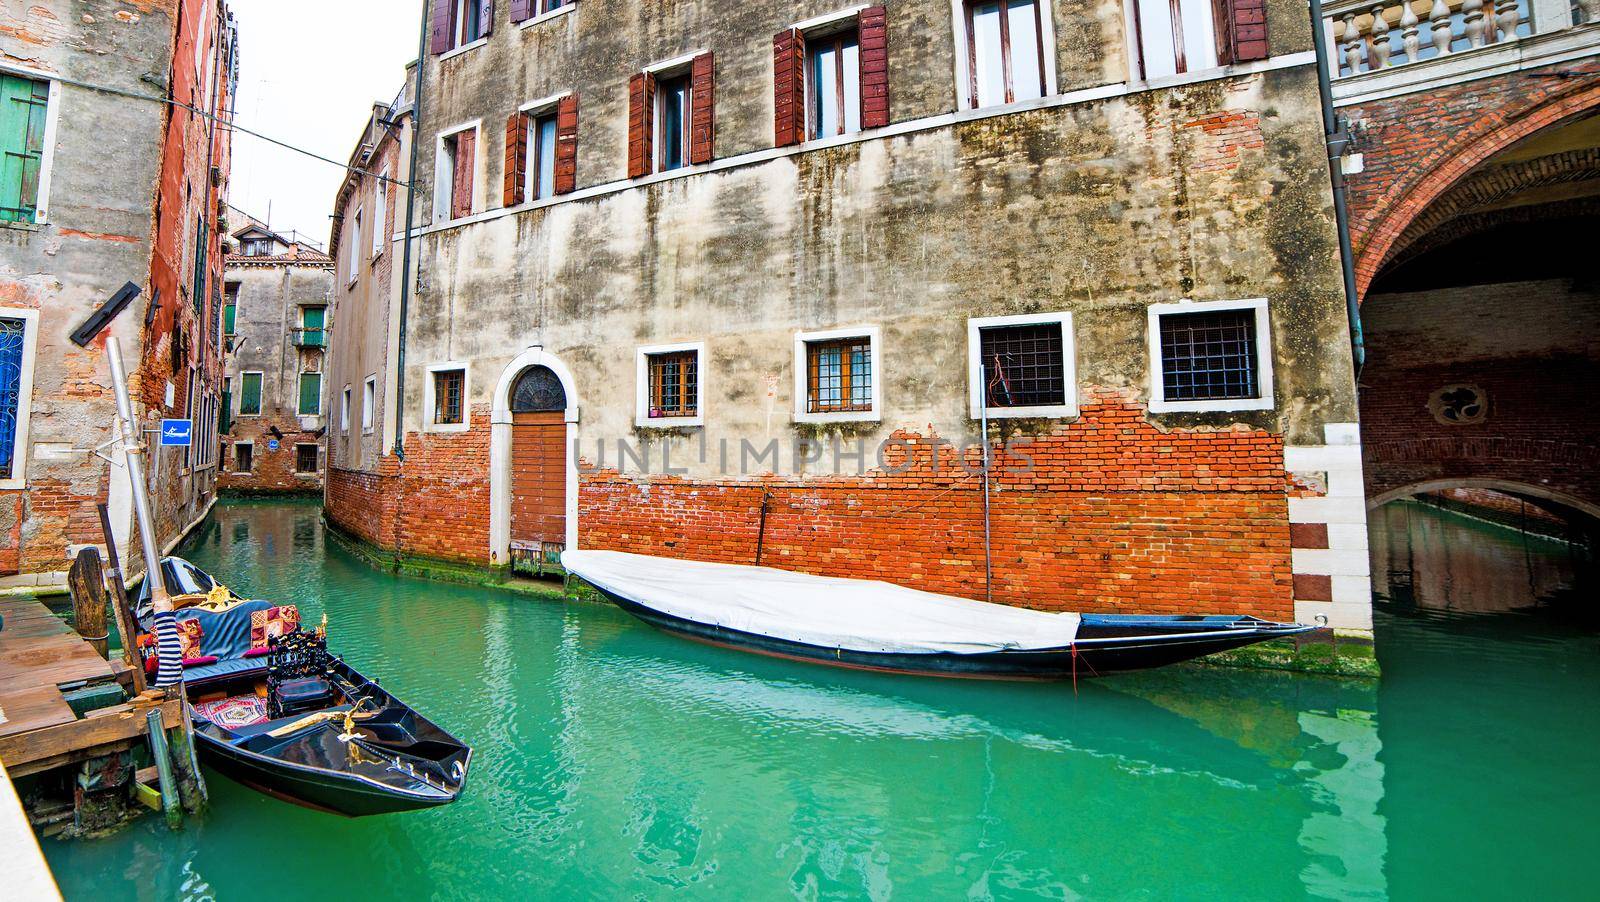 Gondola on Venice canal with houses on the street